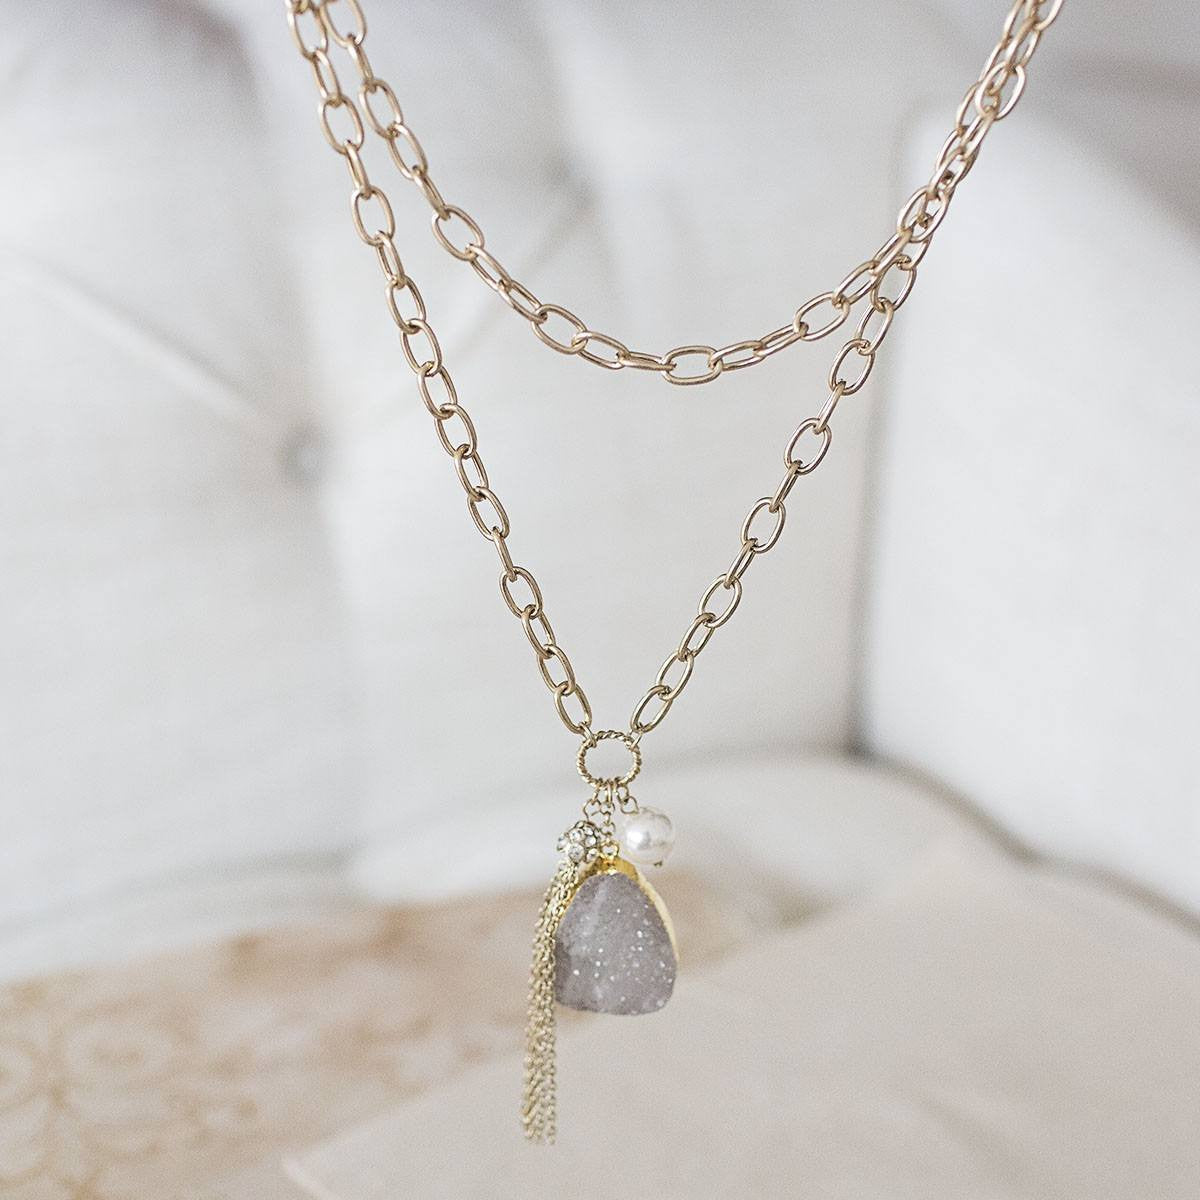 Double Chain Crystals and Druzy Necklace